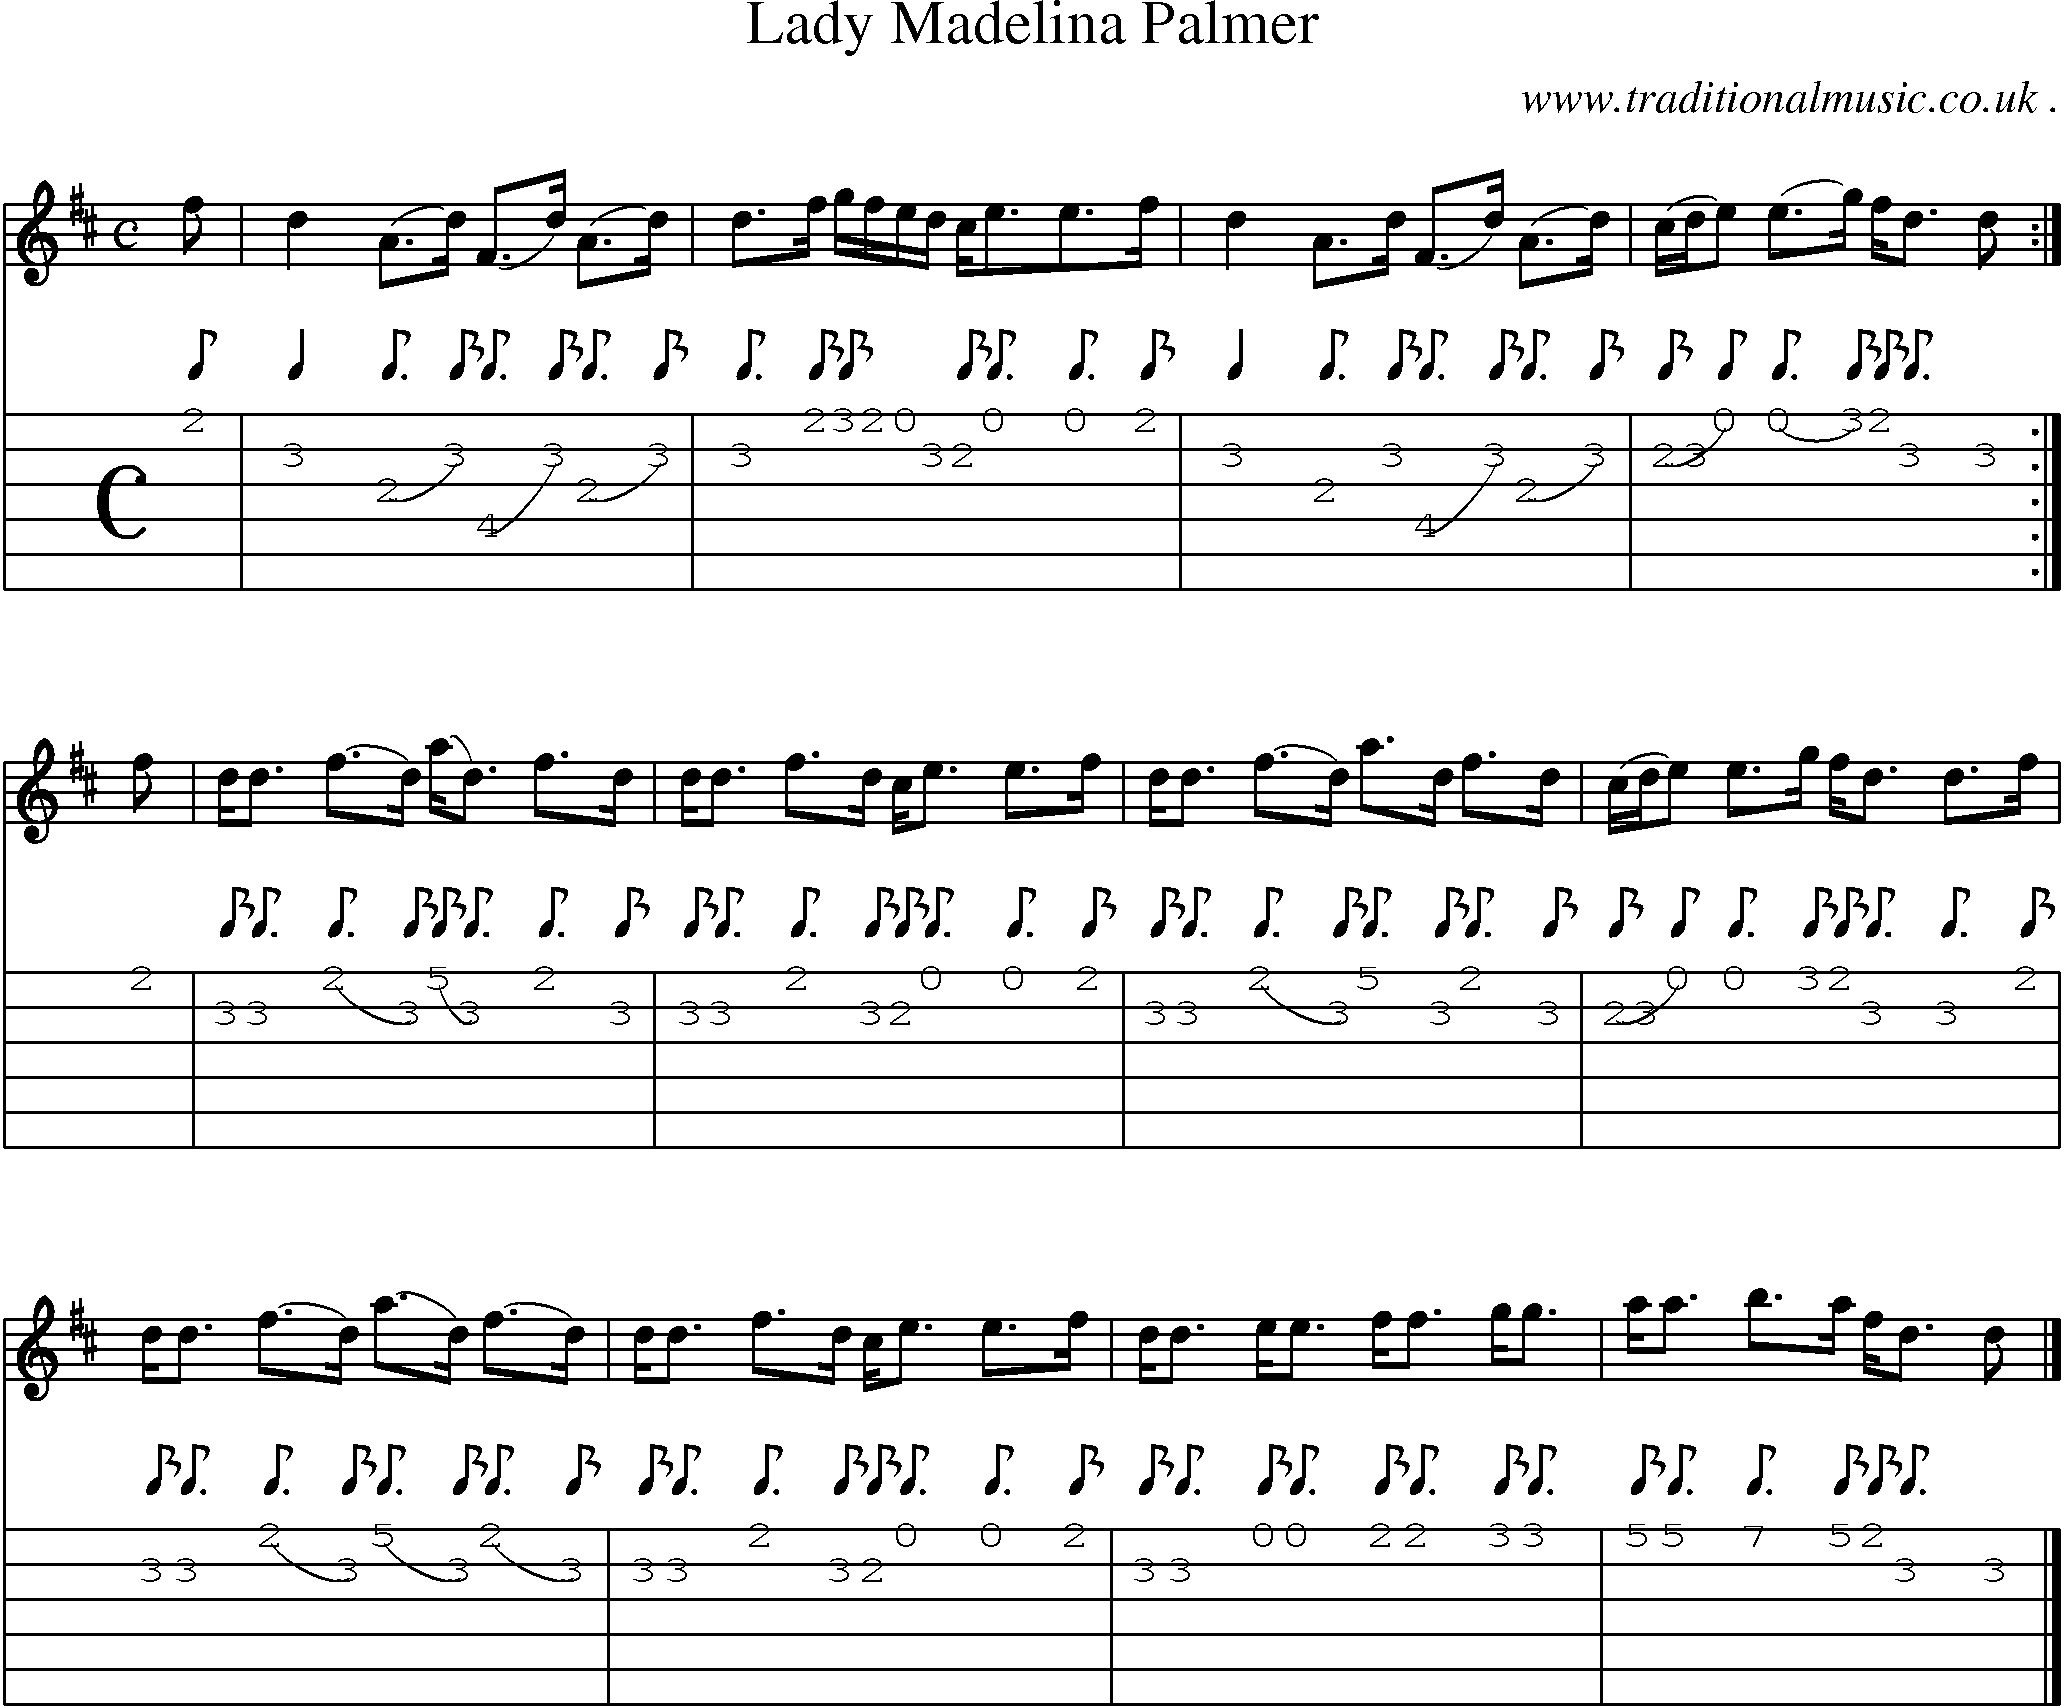 Sheet-music  score, Chords and Guitar Tabs for Lady Madelina Palmer